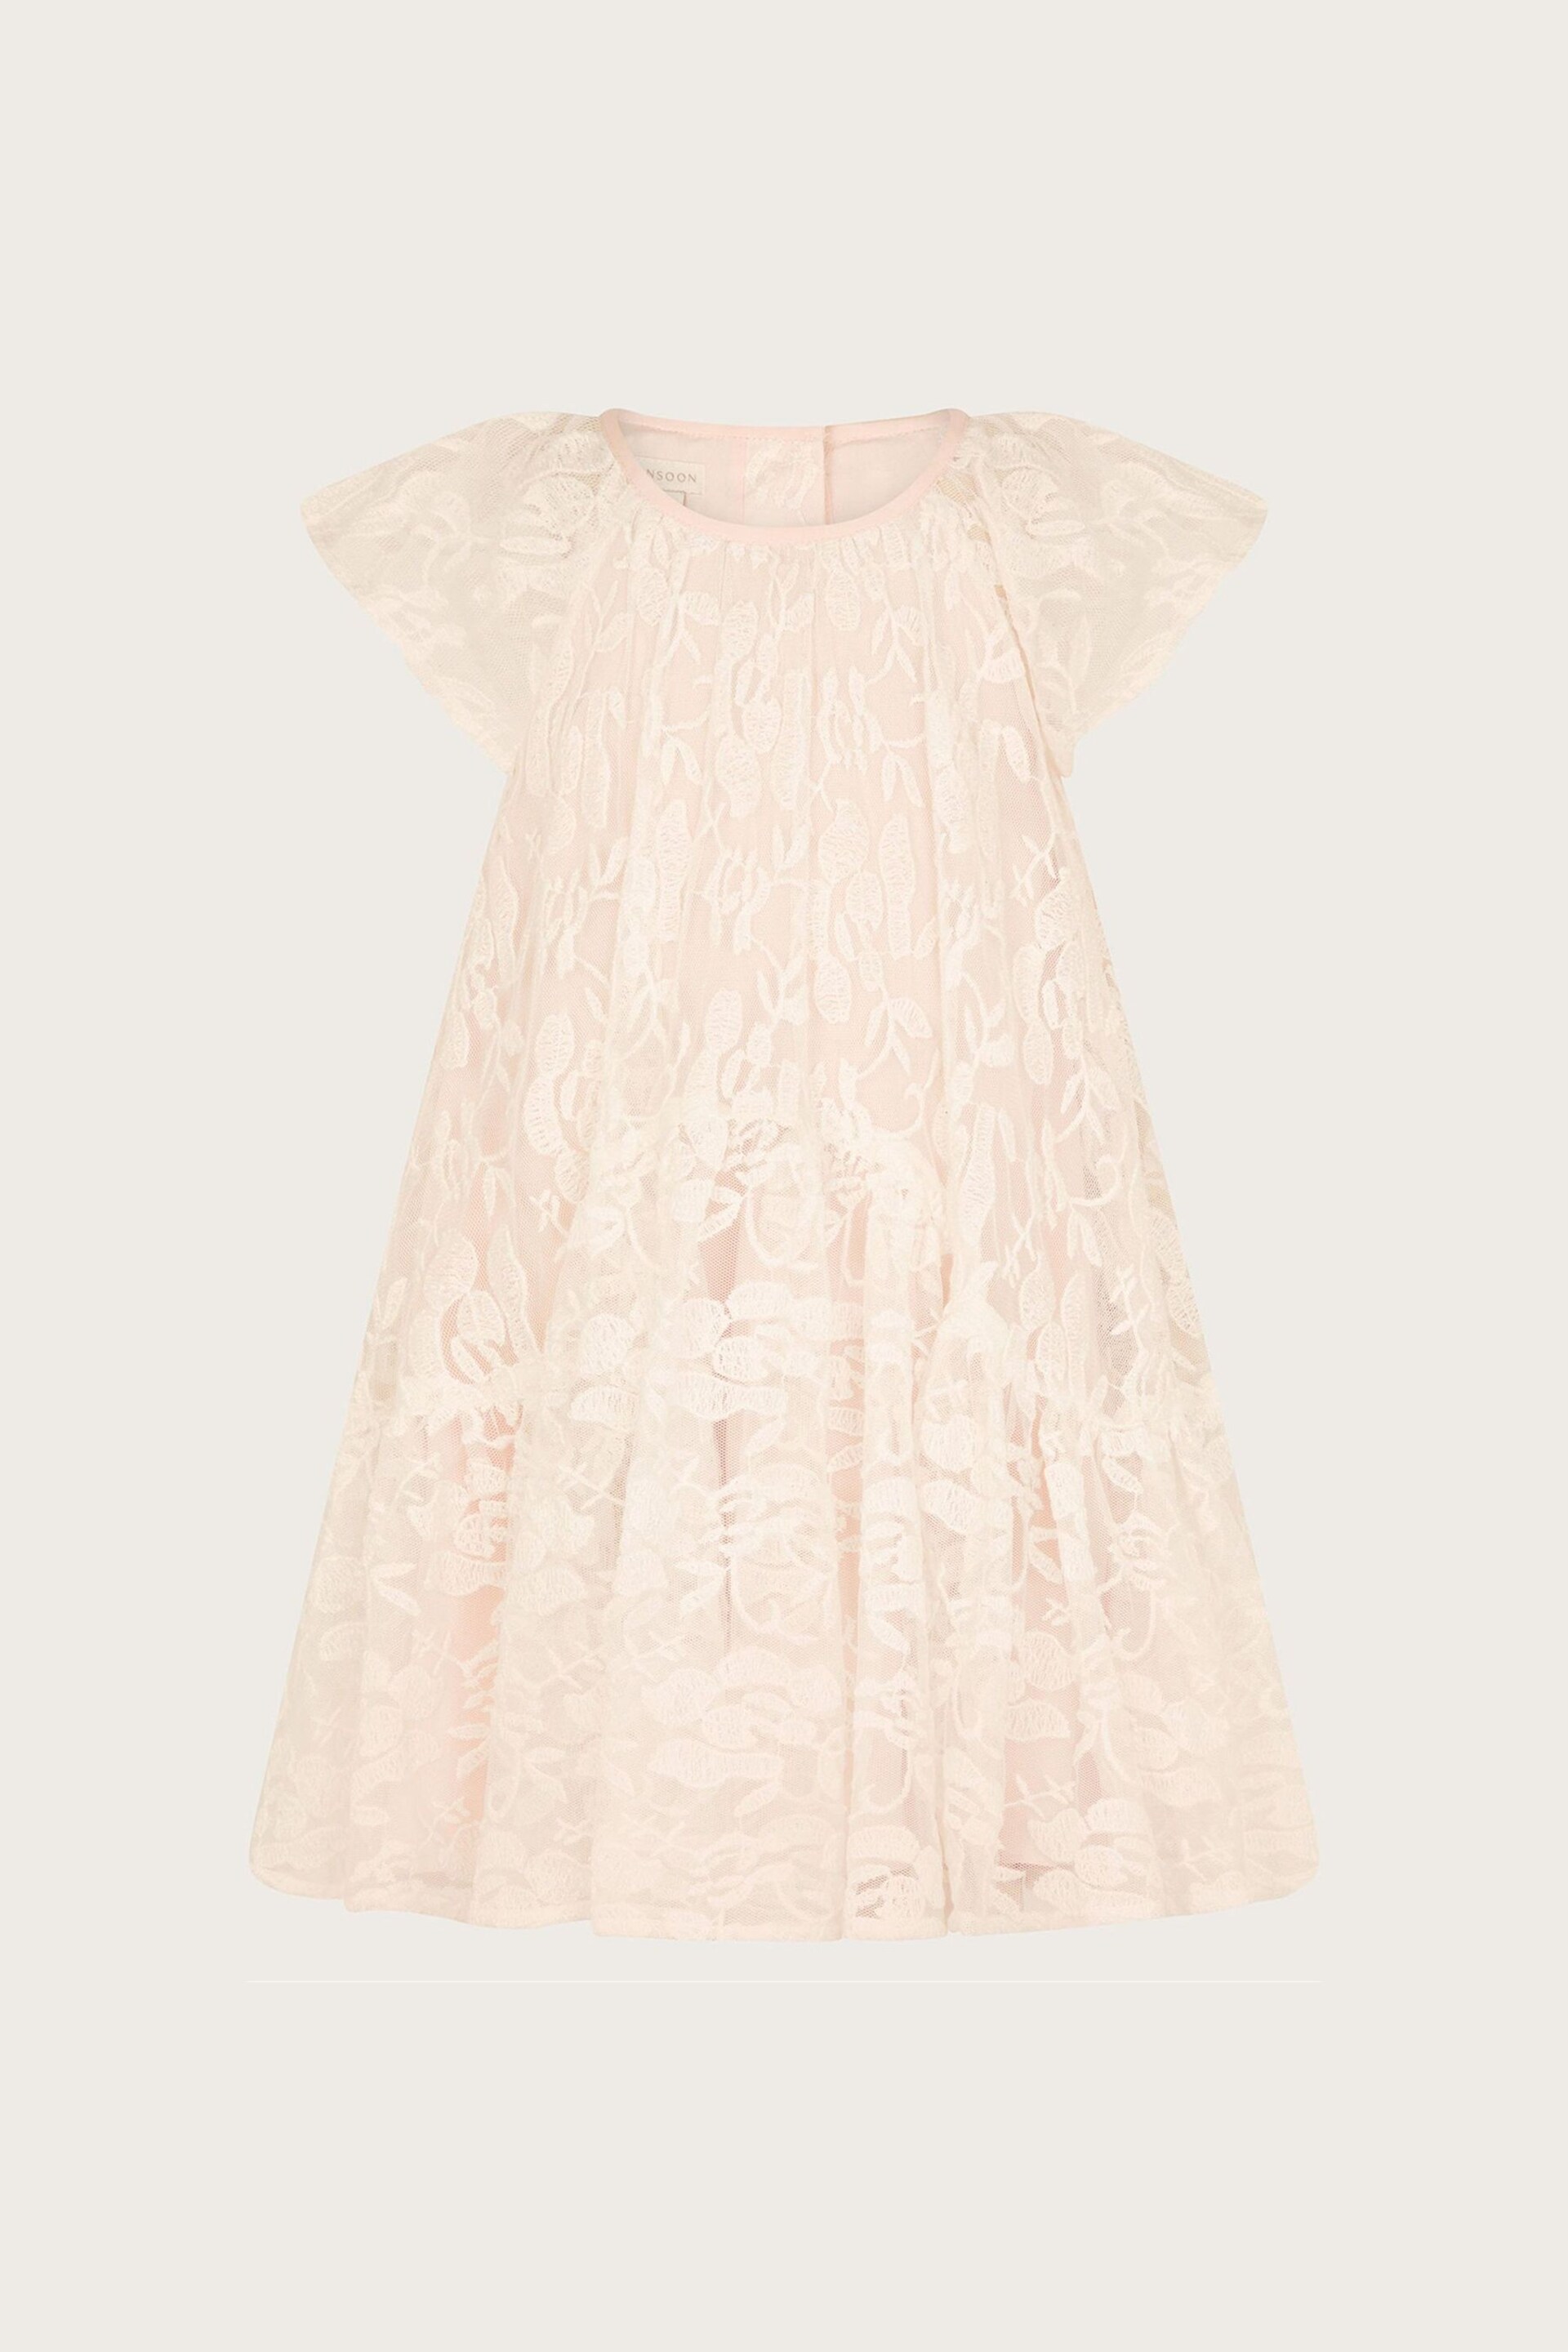 Monsoon Pink Baby Annette Lace Dress - Image 1 of 3